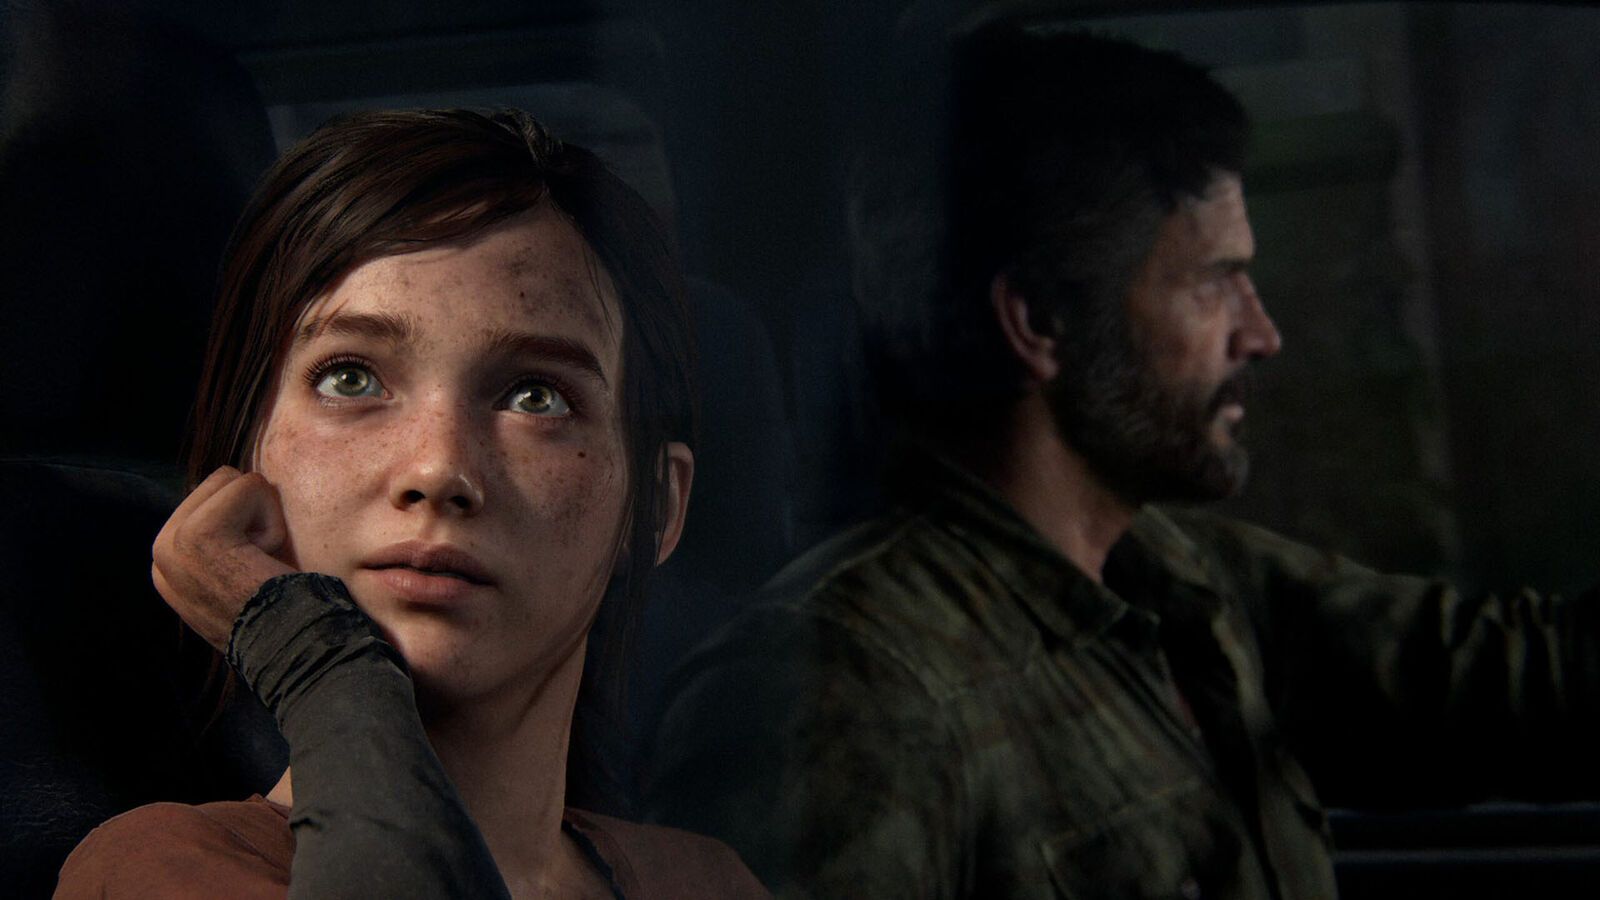 Part 1 of The Last of Us: How to Use Unlocked Framerates